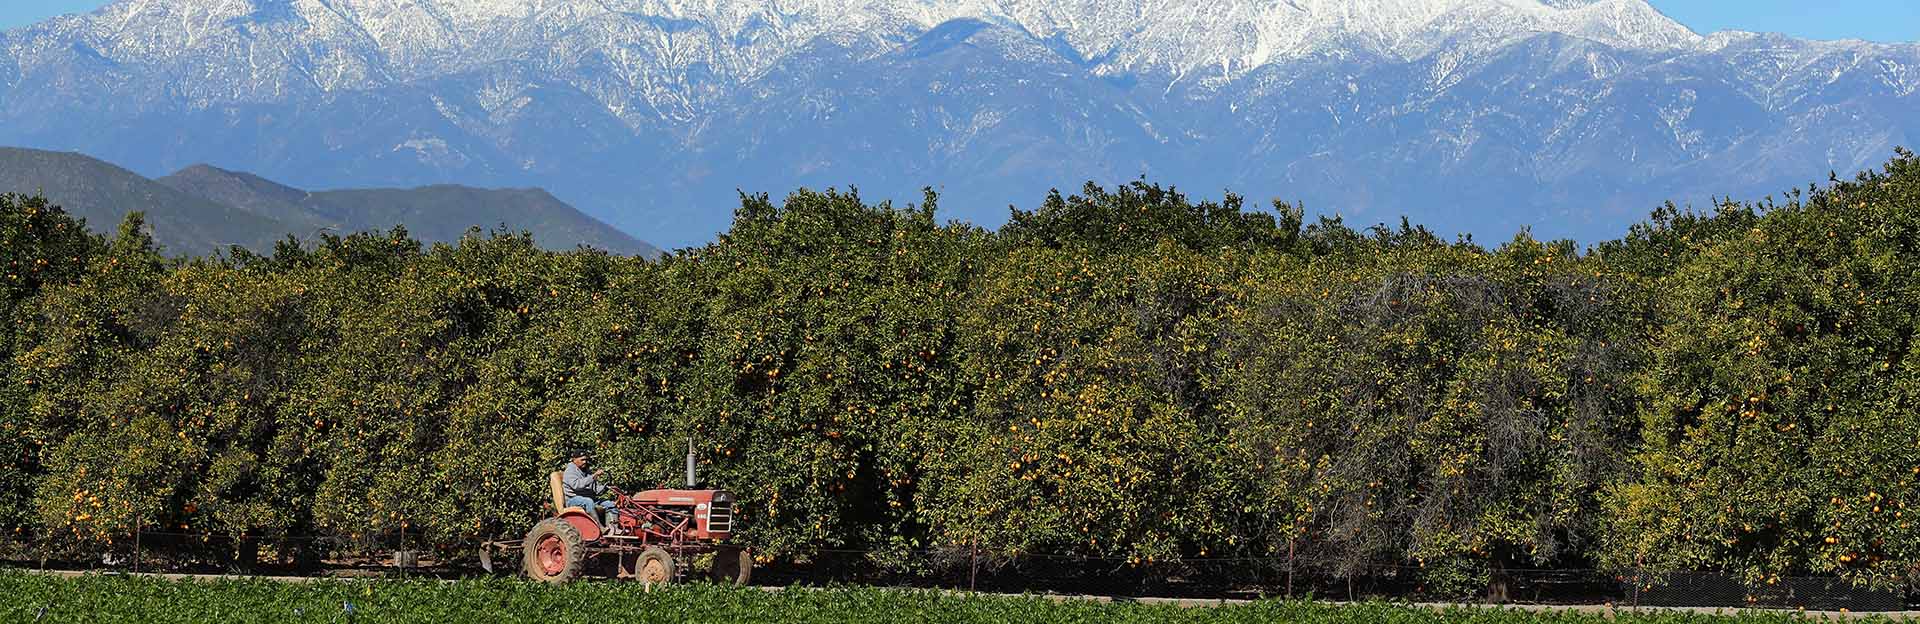 Agricultural Operations, tractor in front of citrus and mountains, (c) UCR / Stan Lim